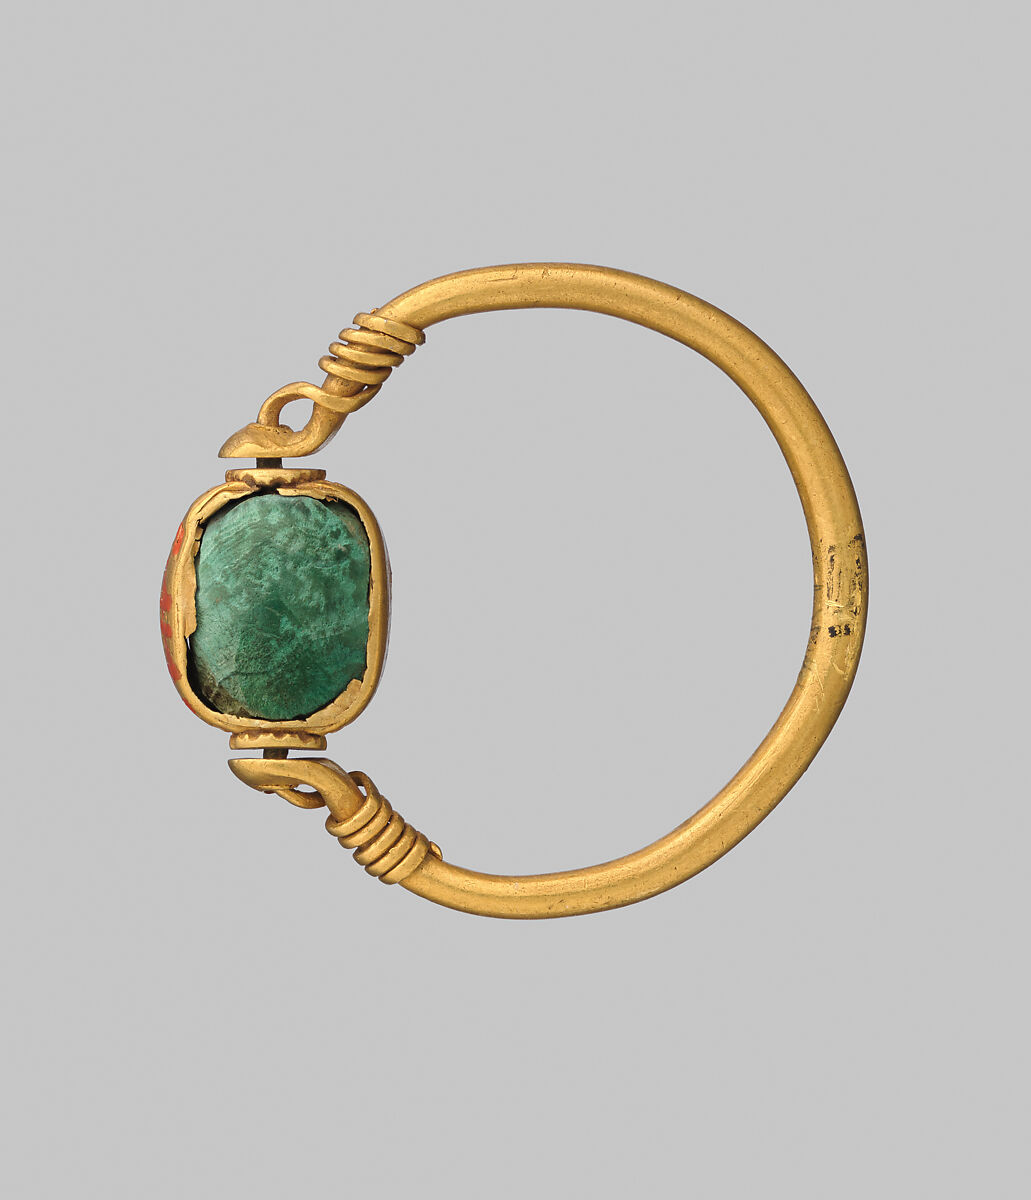 Ring with cable border, green paste, Gold, glass paste 